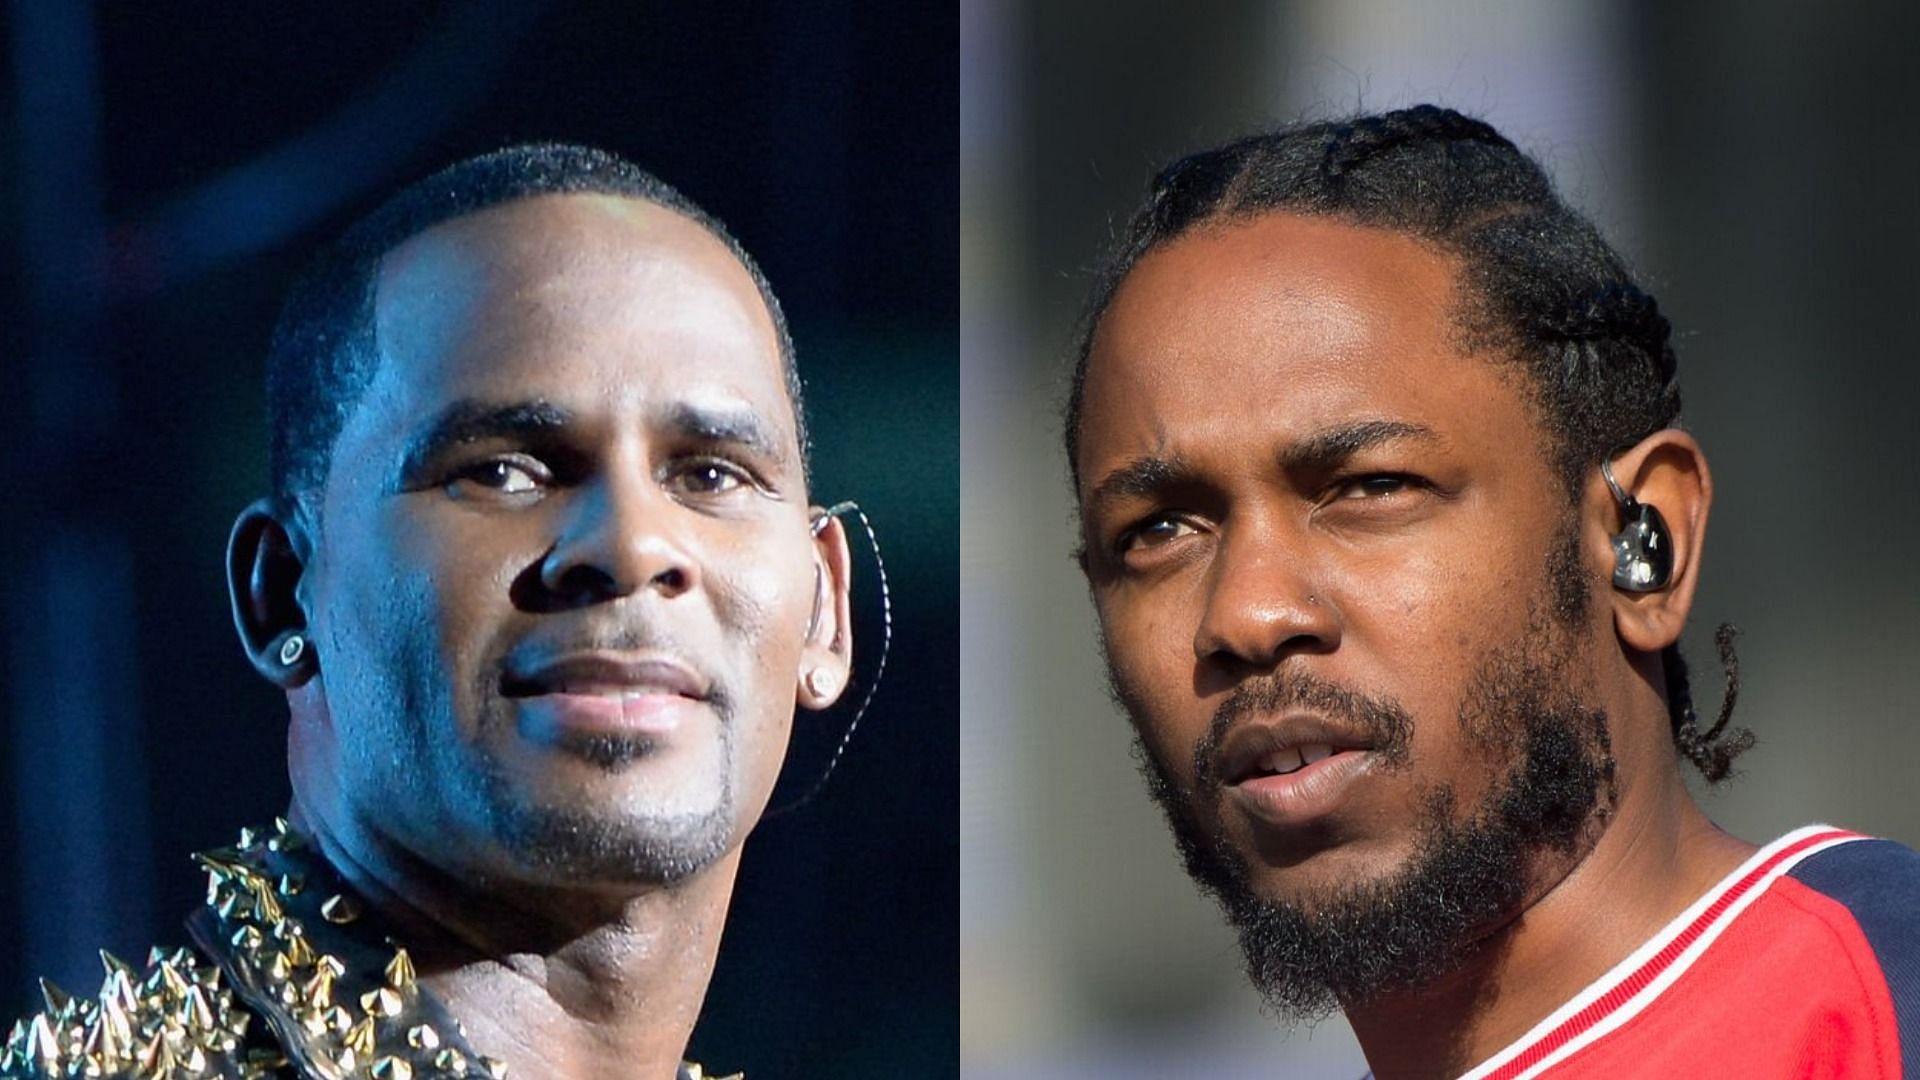 R Kelly&#039;s musical abilities sparked online debate following Kendrick Lamar&#039;s new songs mentioning the controversial singer (Image via Earl Gibson III/Getty Images and Samir Hussein/Getty Images)